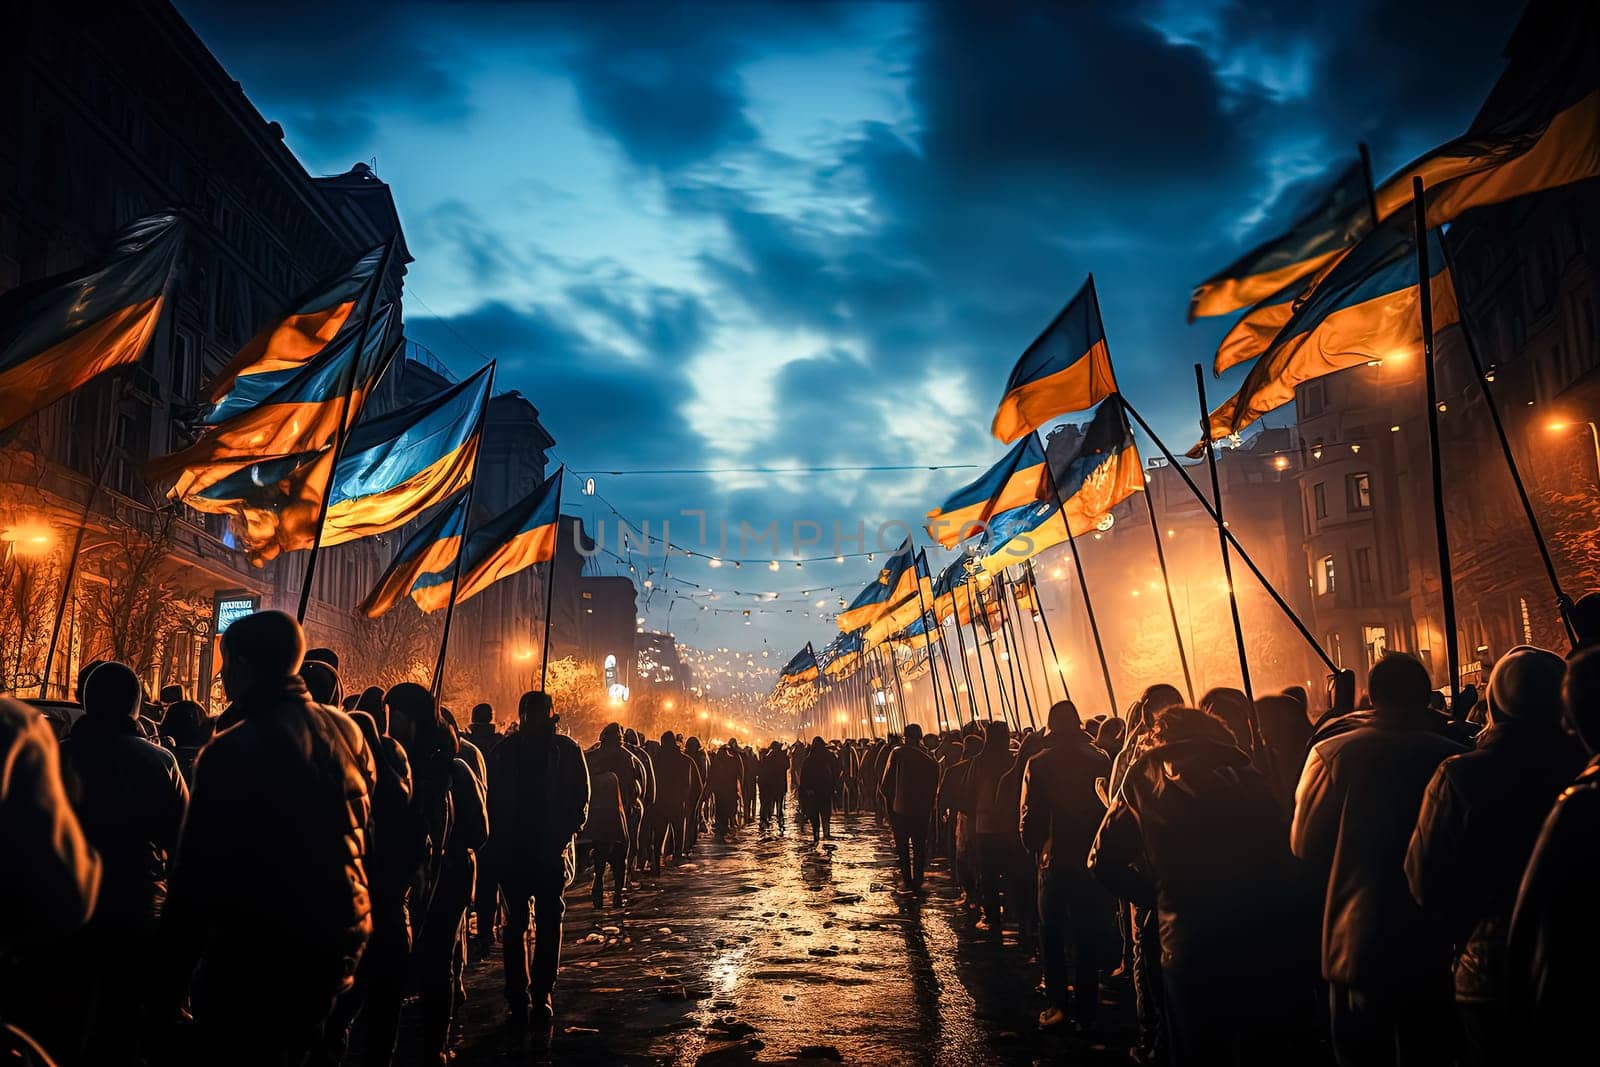 People waving Ukrainian flags at a rally for peace. A stock photo symbolizing solidarity and the collective call for an end to conflict